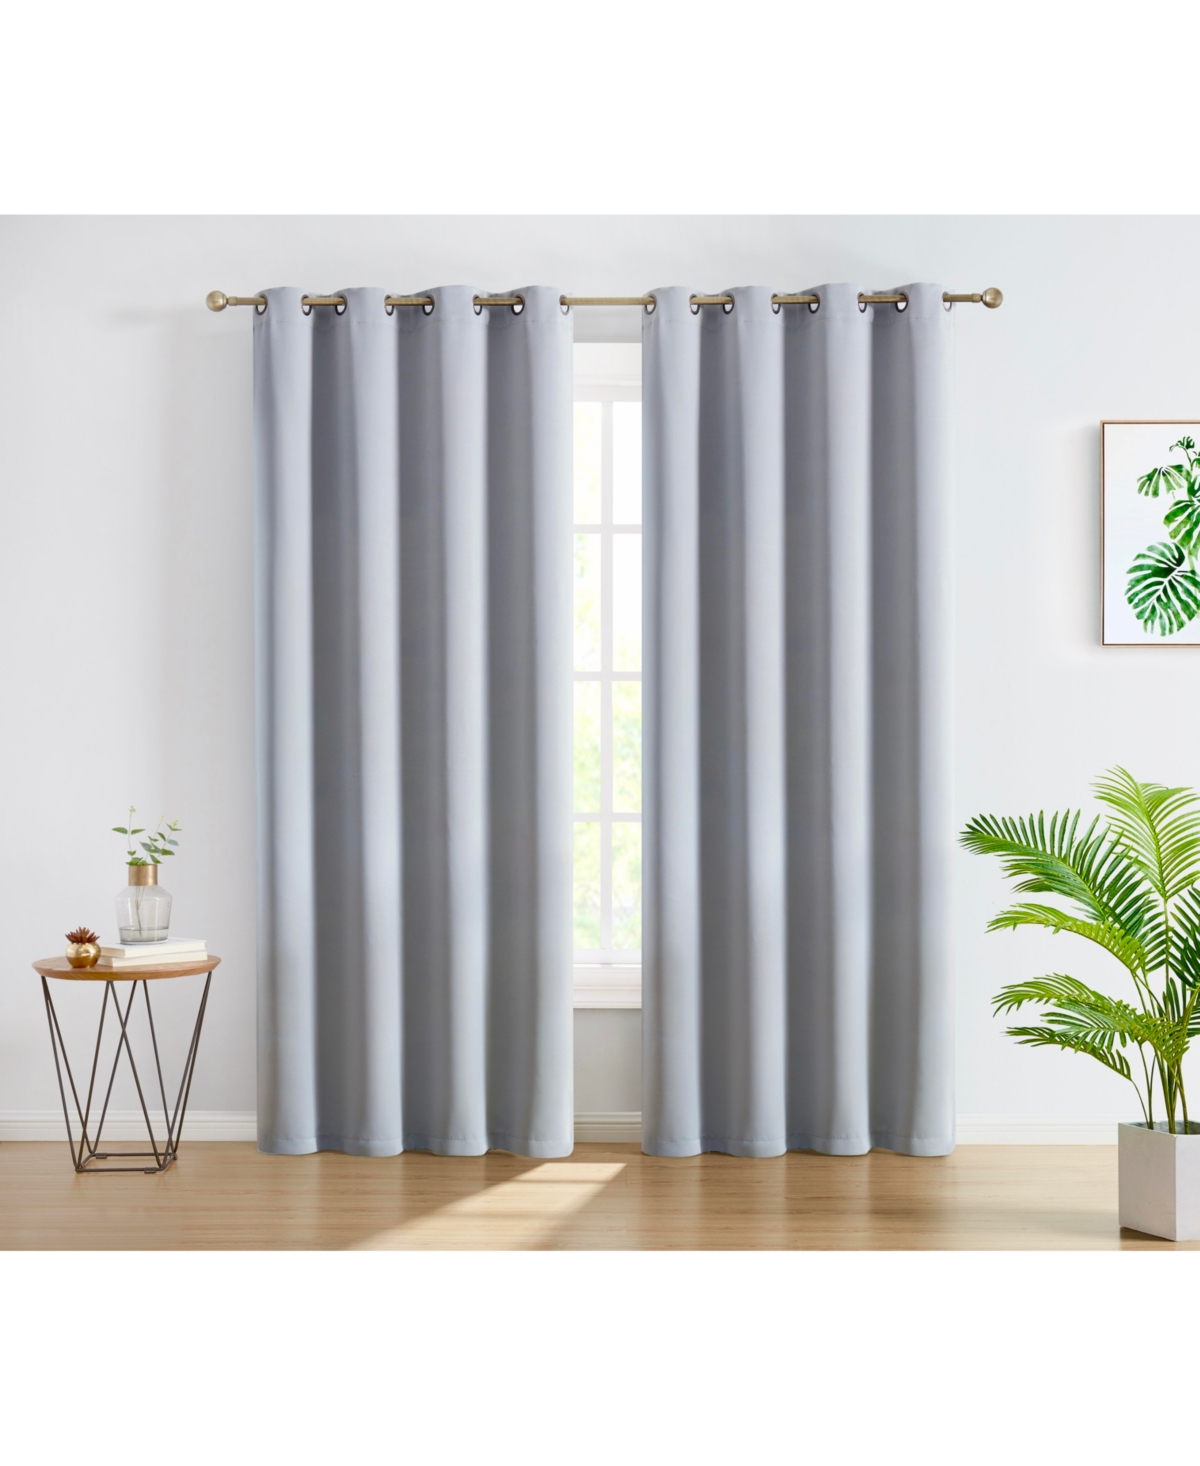 Oxford Blackout Curtains for Bedroom, Noise Reduction Thermal Insulated Window Curtain Grommet Panels, Set of 2 - Light grey